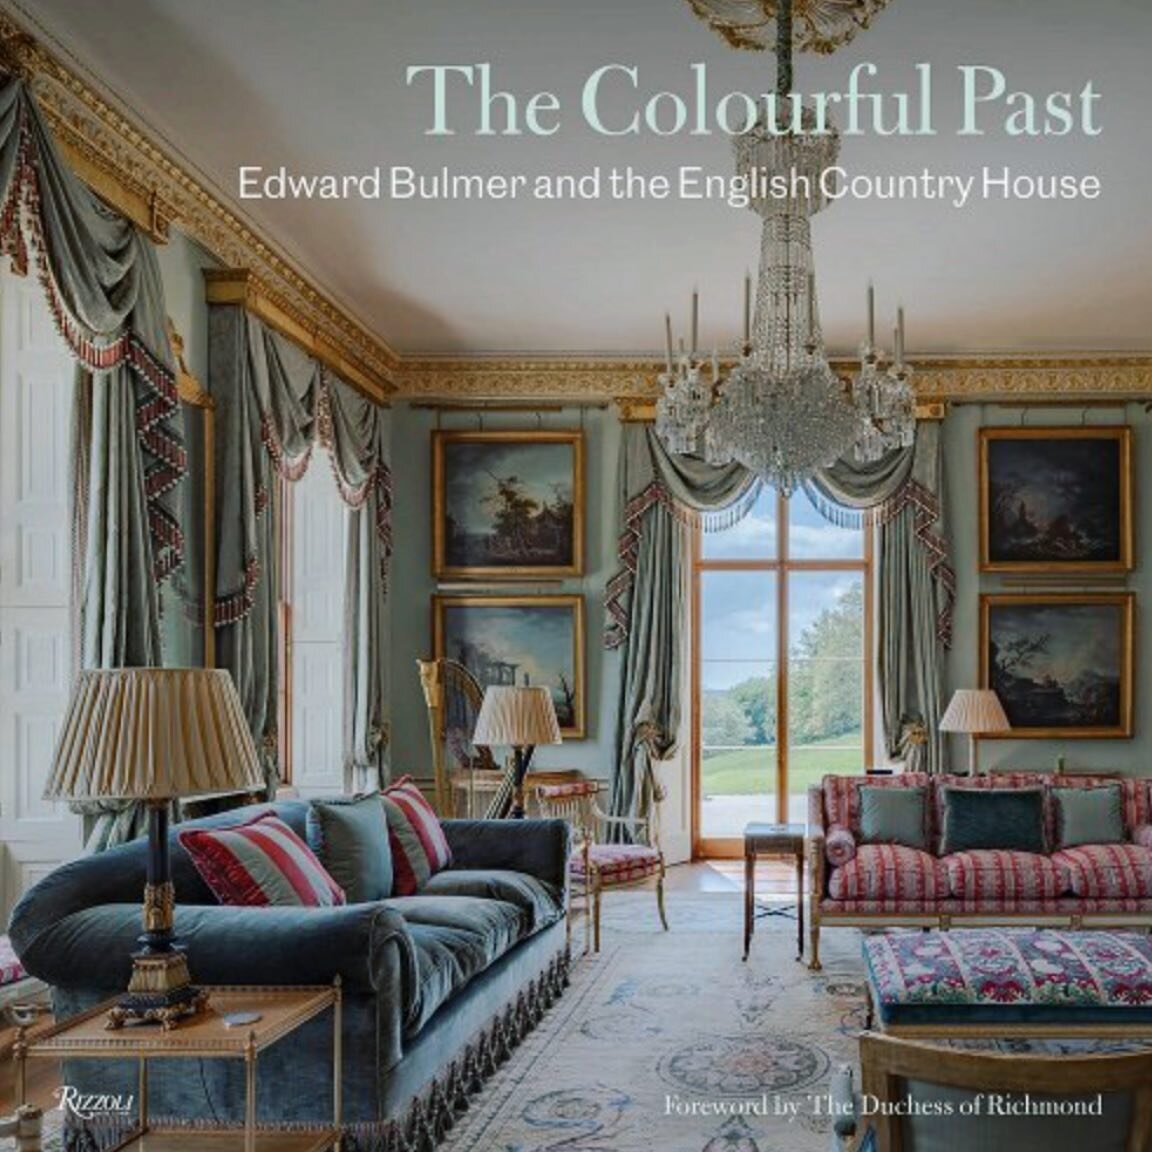 We love using Edward Bulmer&rsquo;s beautiful paints!
 
This @rizzolibooksuk book featuring his interiors offers a masterclass in the use of colour in period interiors. 

#paintcolours #designbook #periodinteriors #interiors #interiordesign #interior